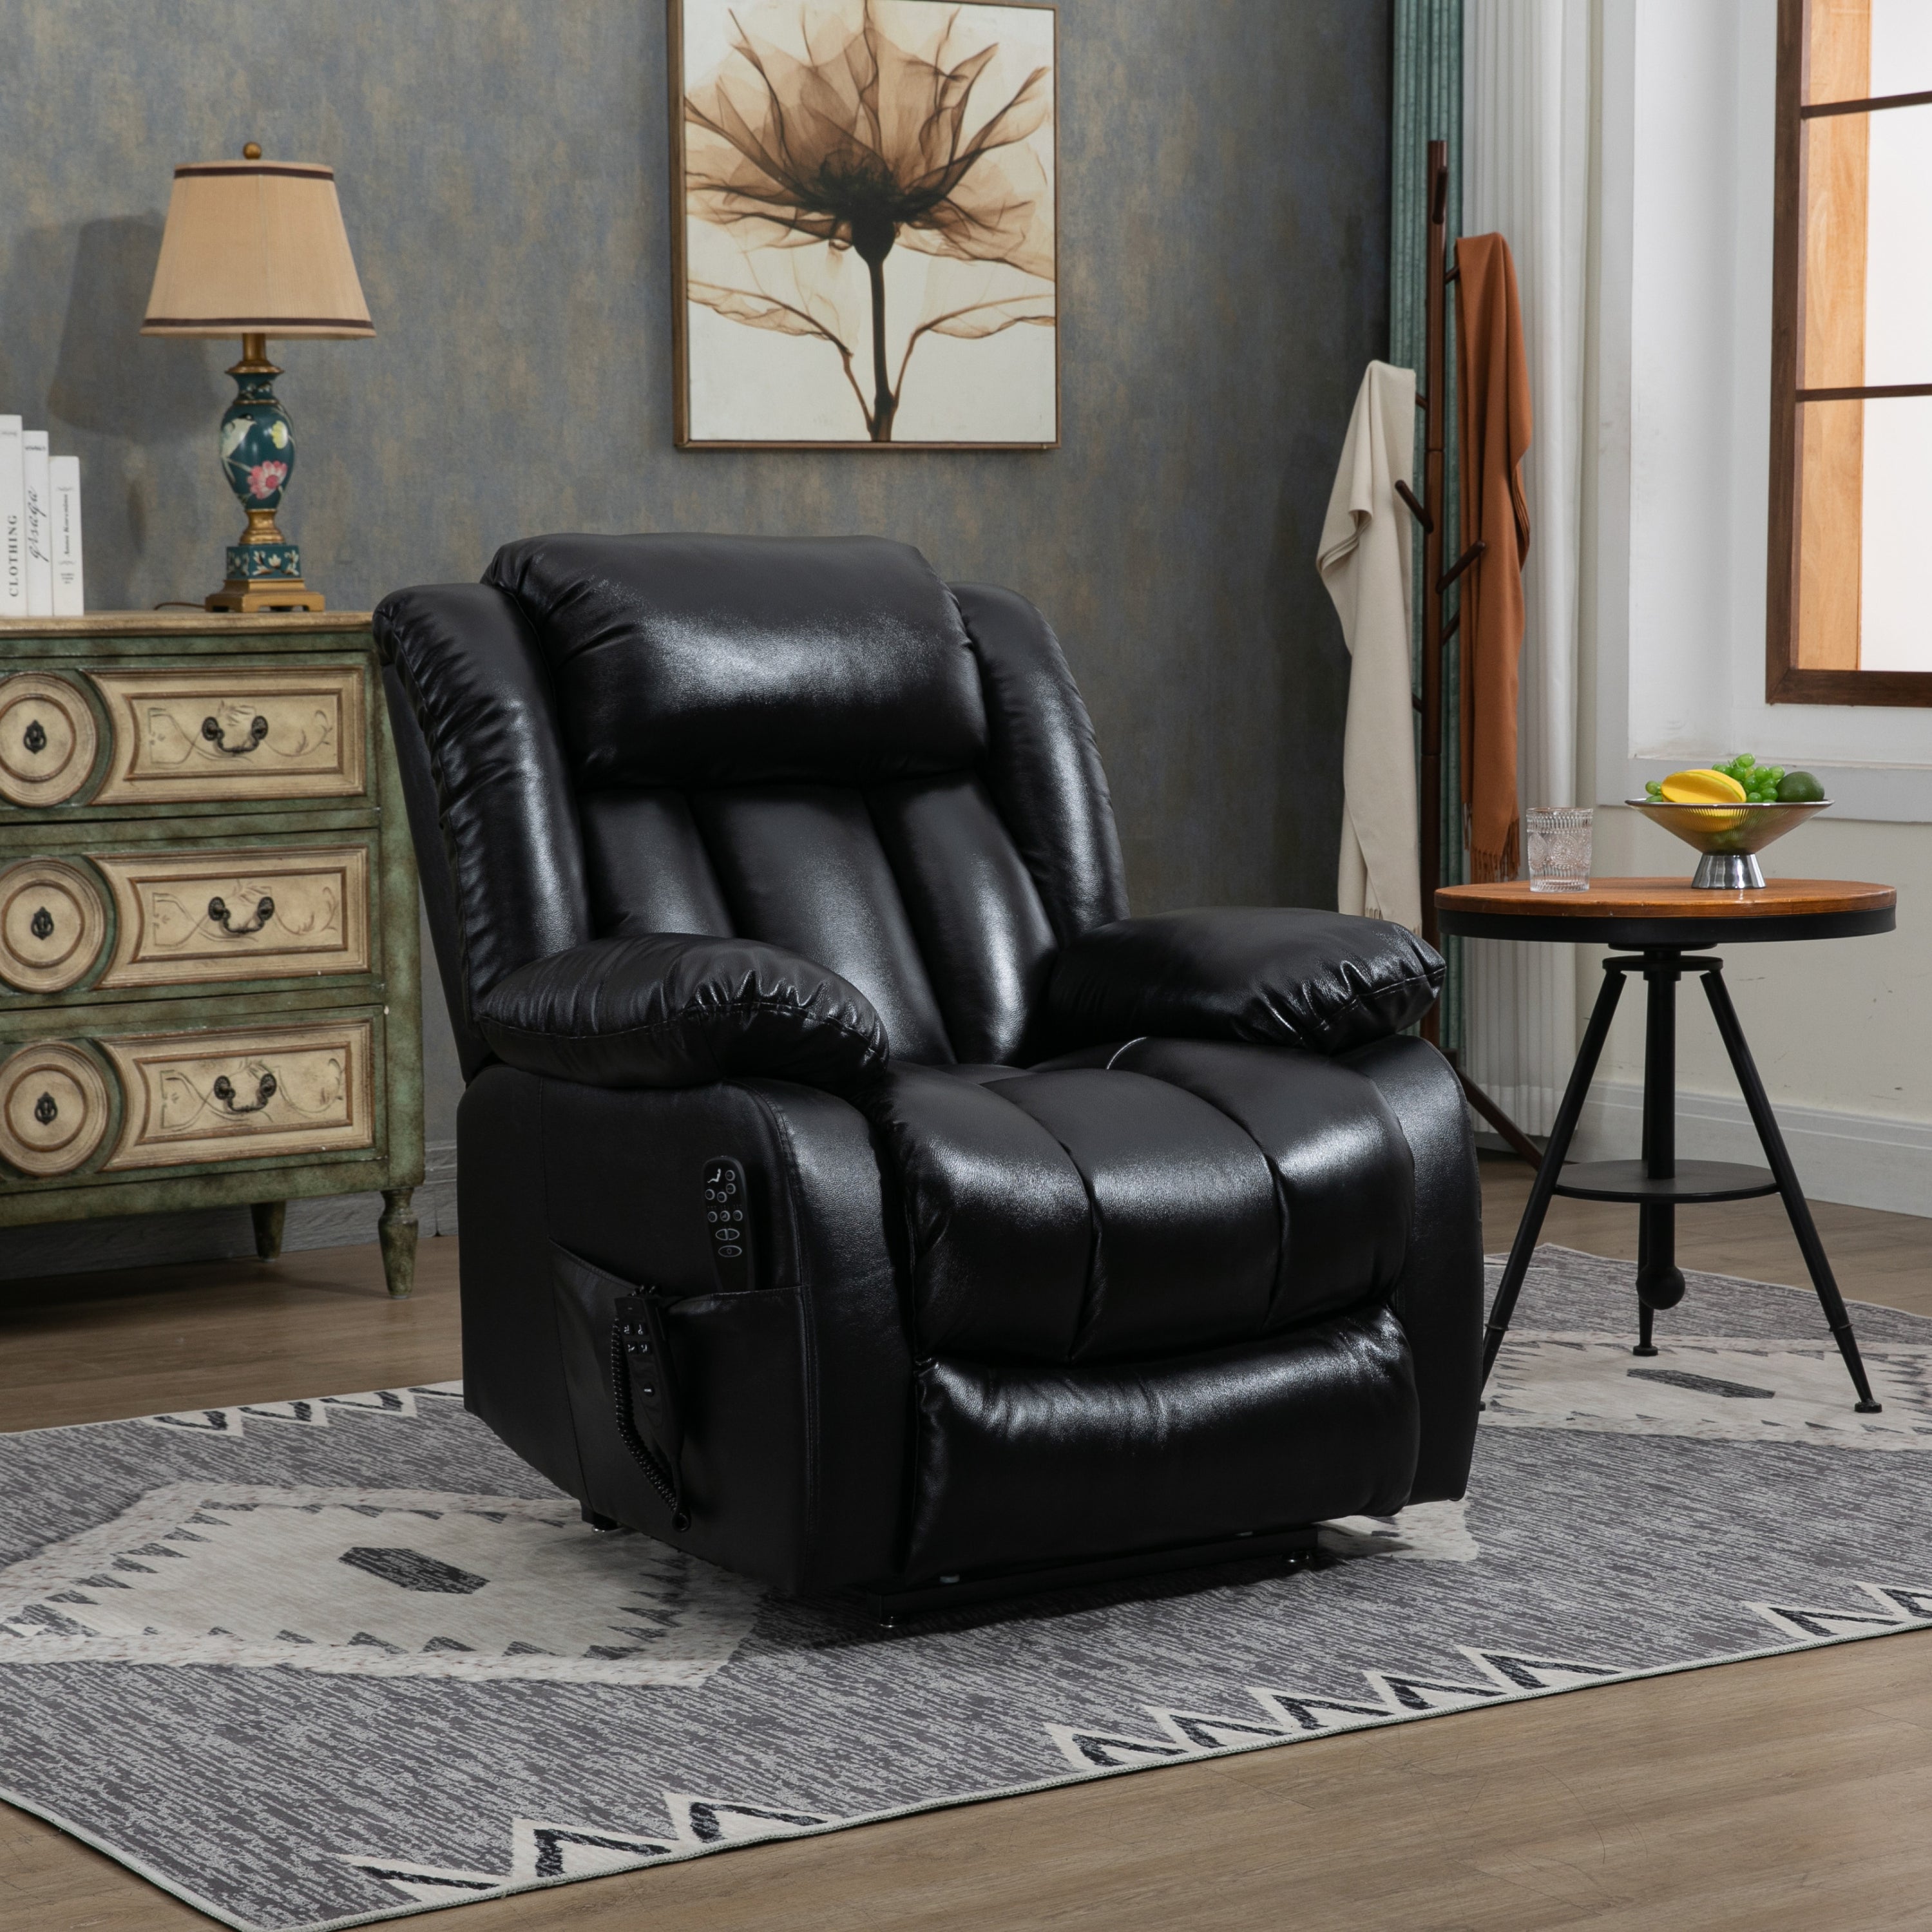 Medium Size Infinite Position Black Leather Power Lift Recliner Chair with Massage and Heat